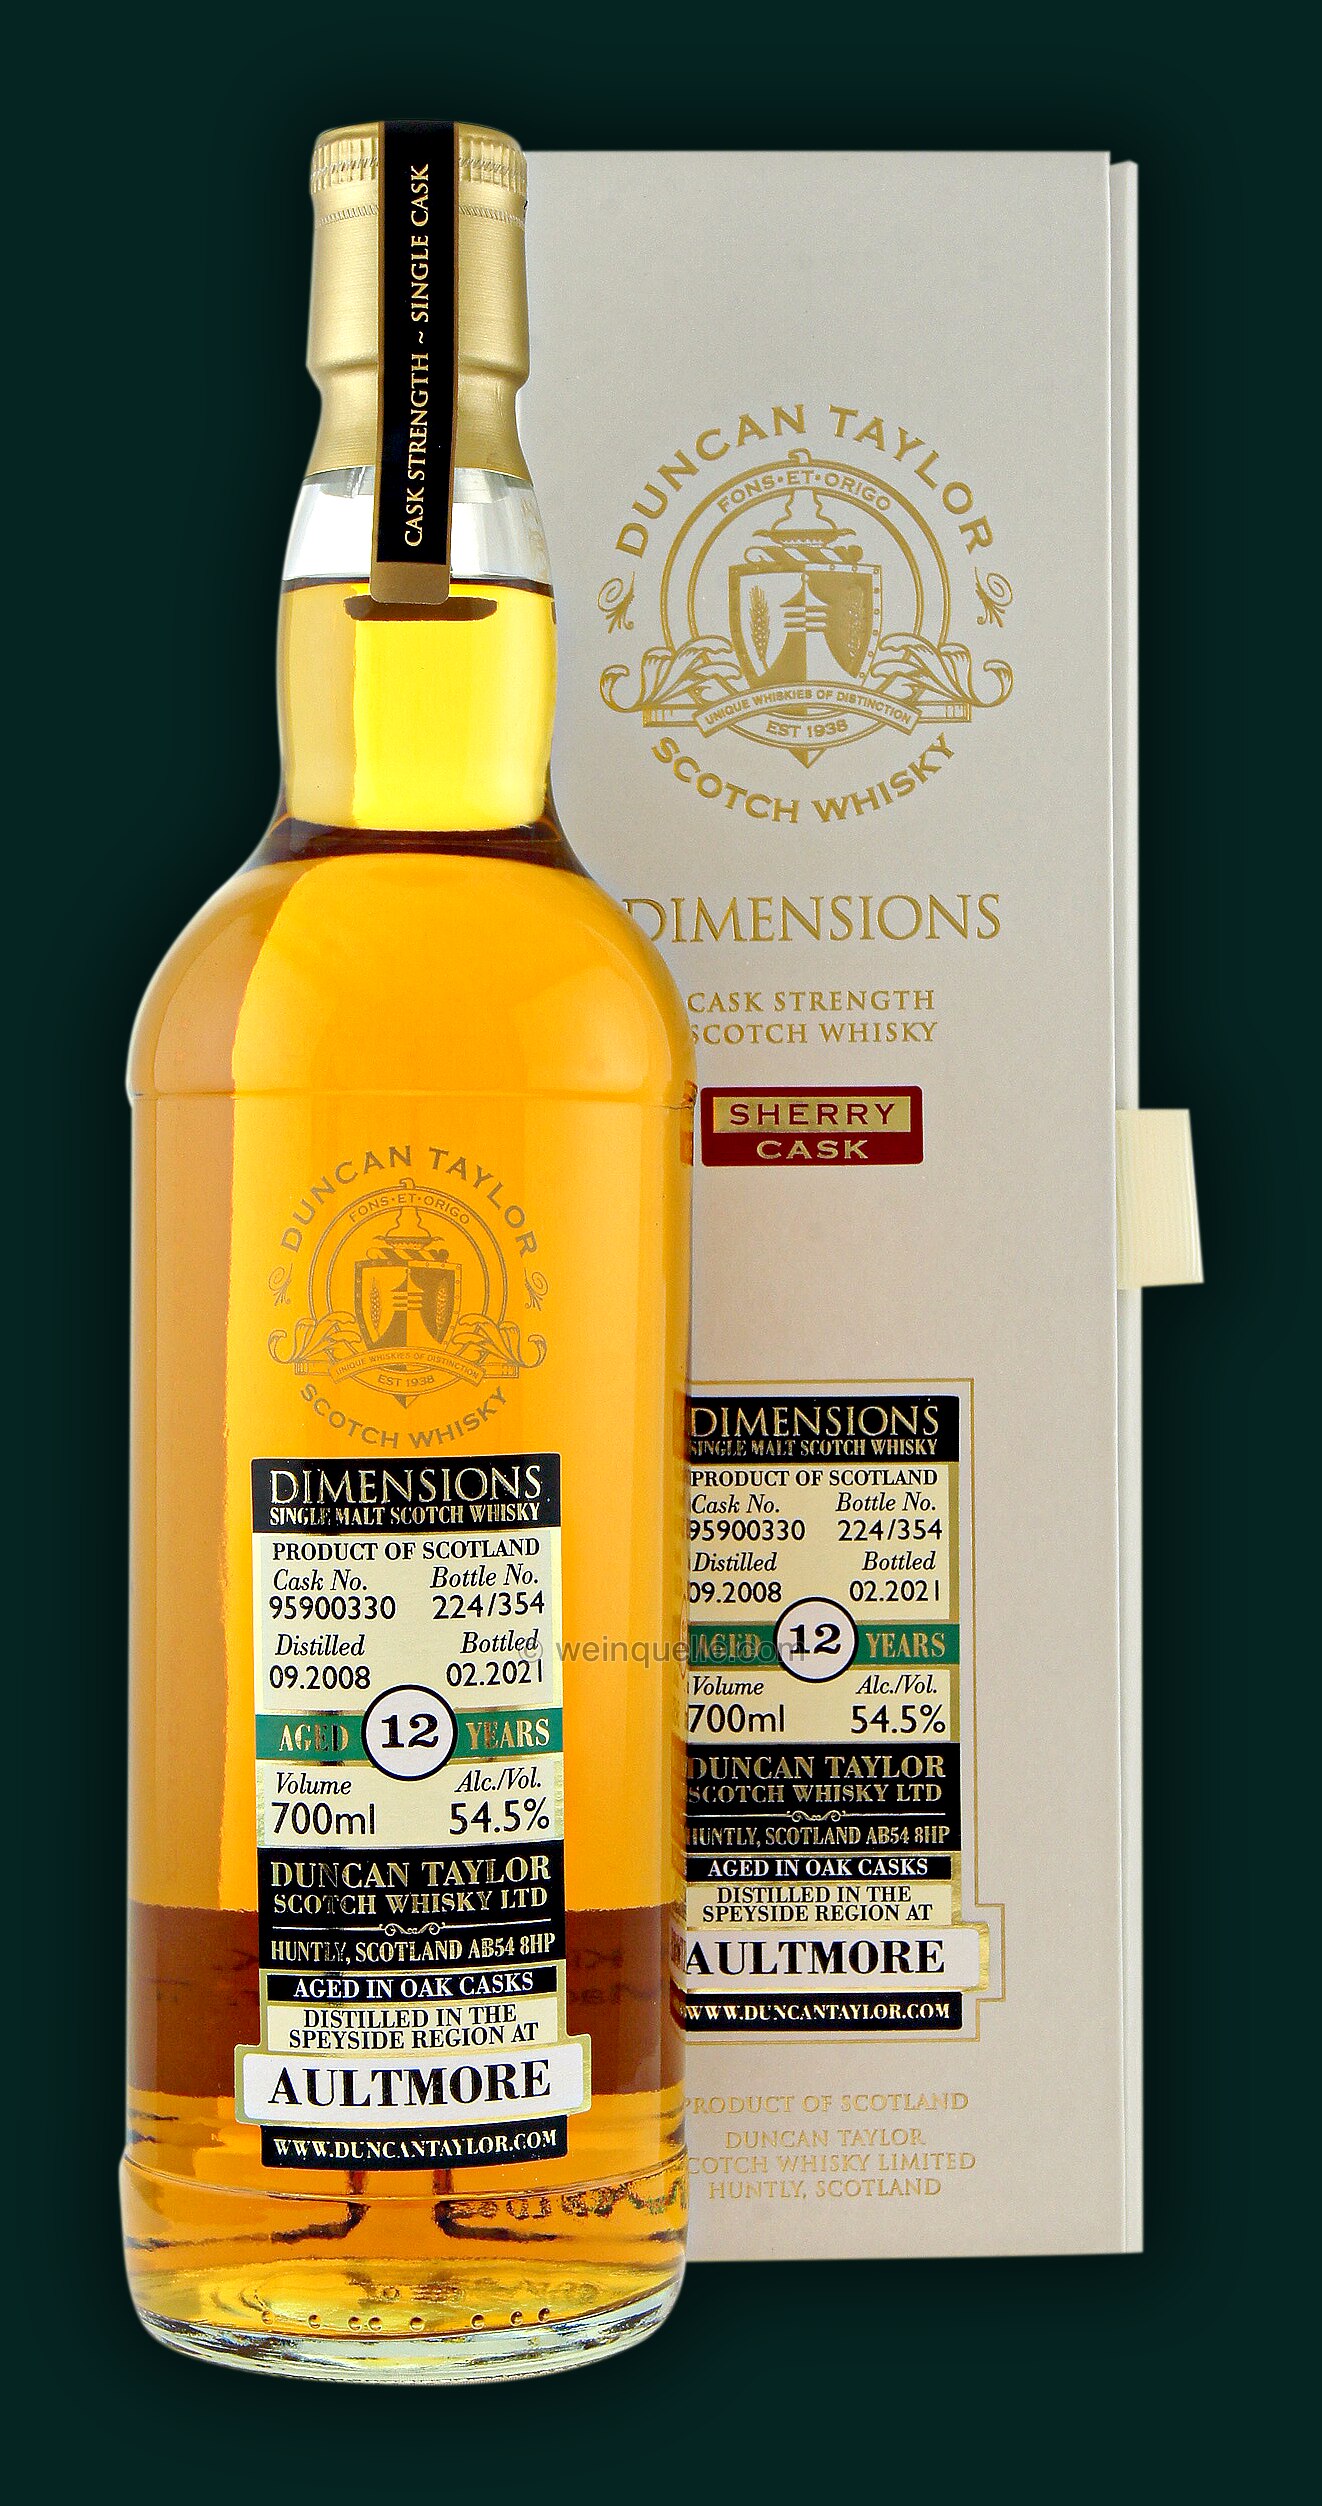 AULTMORE 12 YEARS